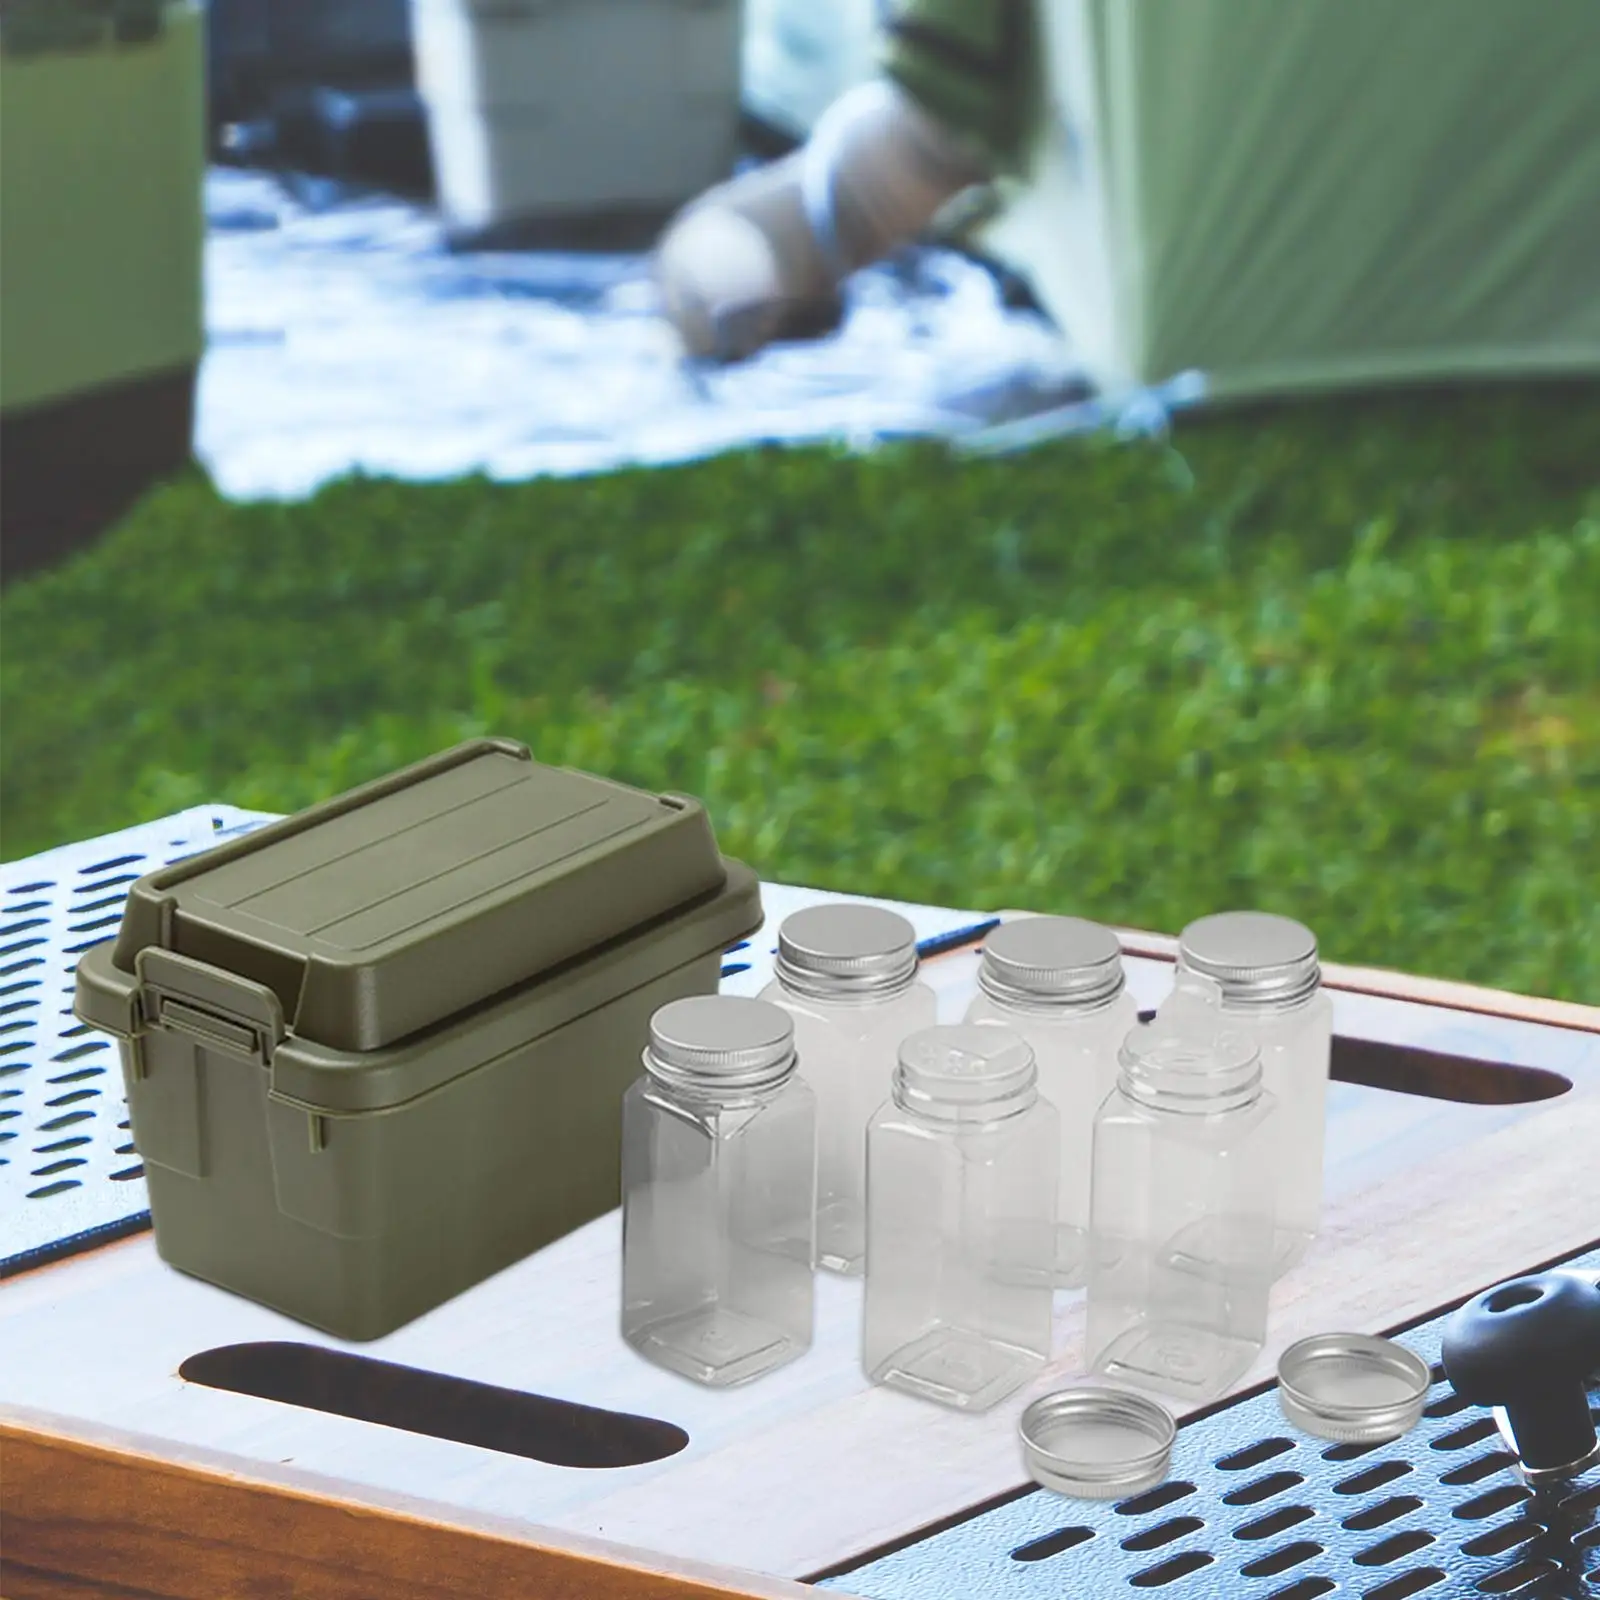 6Pcs Camping Spice Jars Spice Condiment Dispenser Sauce Storage Oil Bottle Spice Containers Spice Organizer for BBQ Travel Home